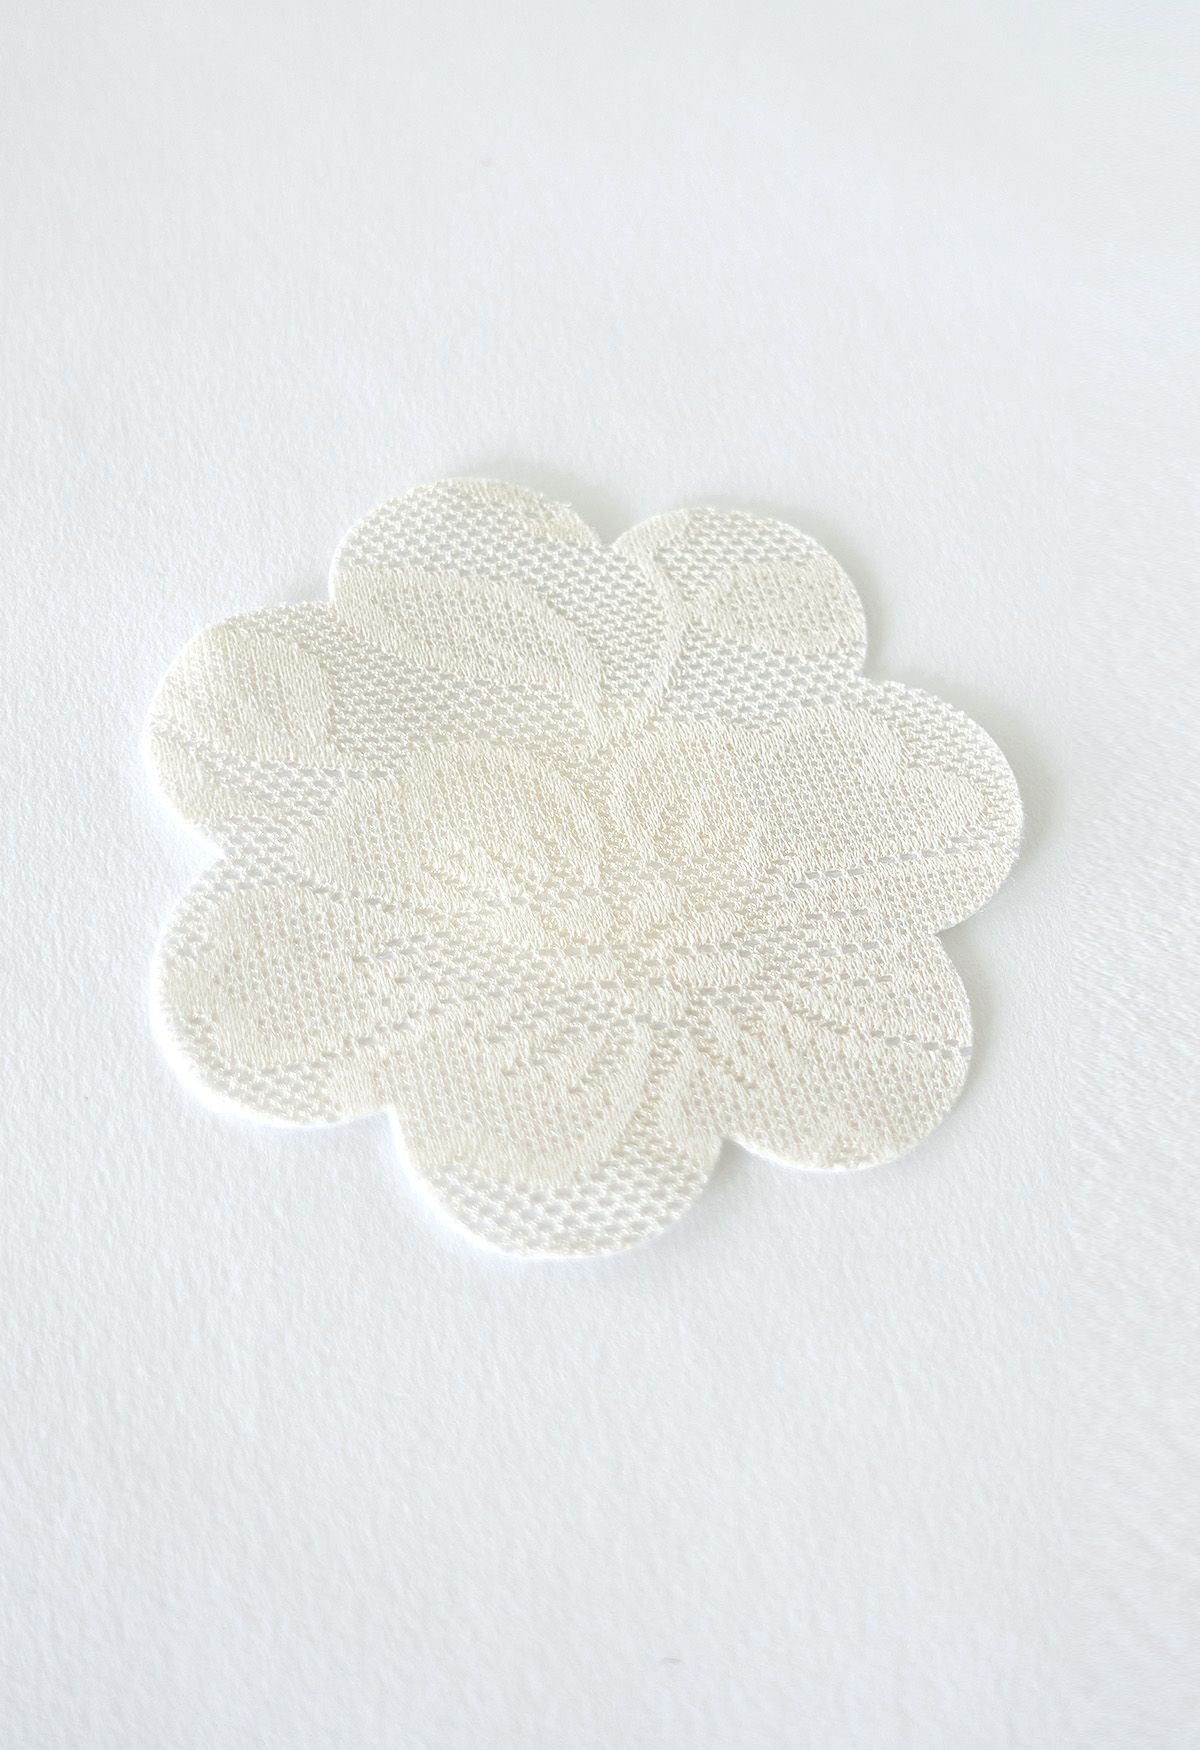 Floral Lace Cover Adhesive Pasties